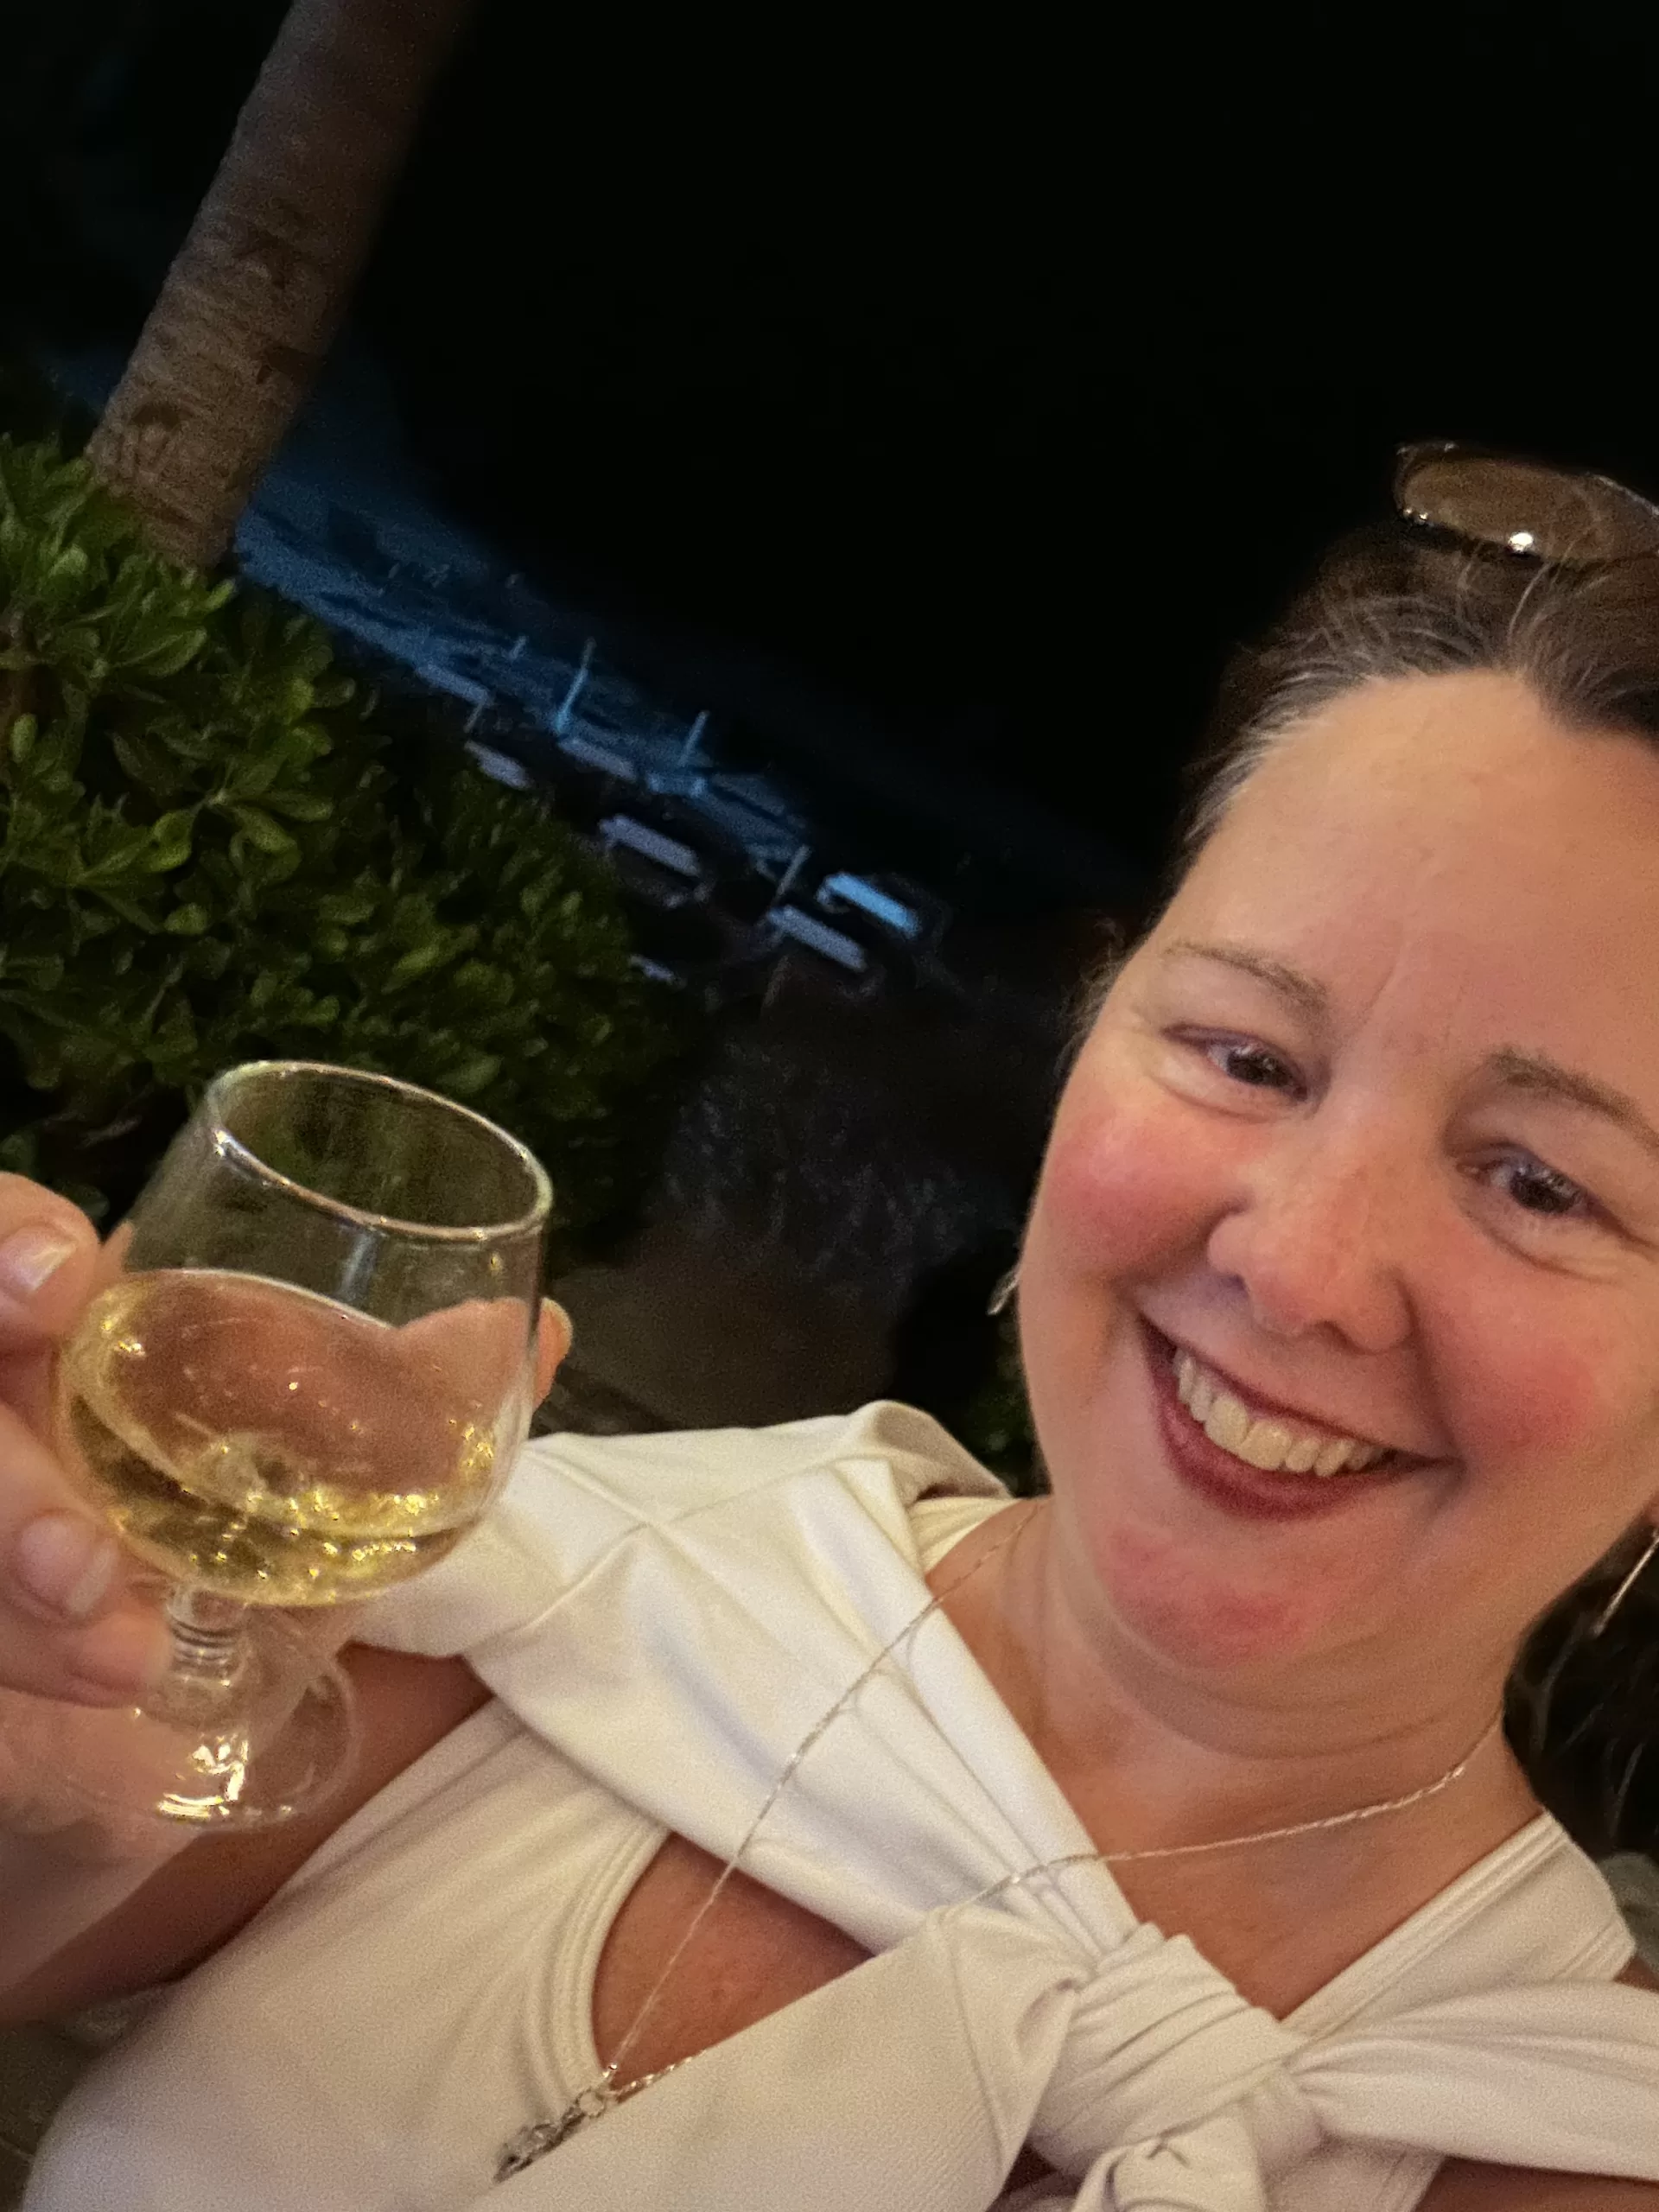 Bridget Espinosa holding a glass of alcohol, enjoying the evening at a beach club in Puerto Morelos.